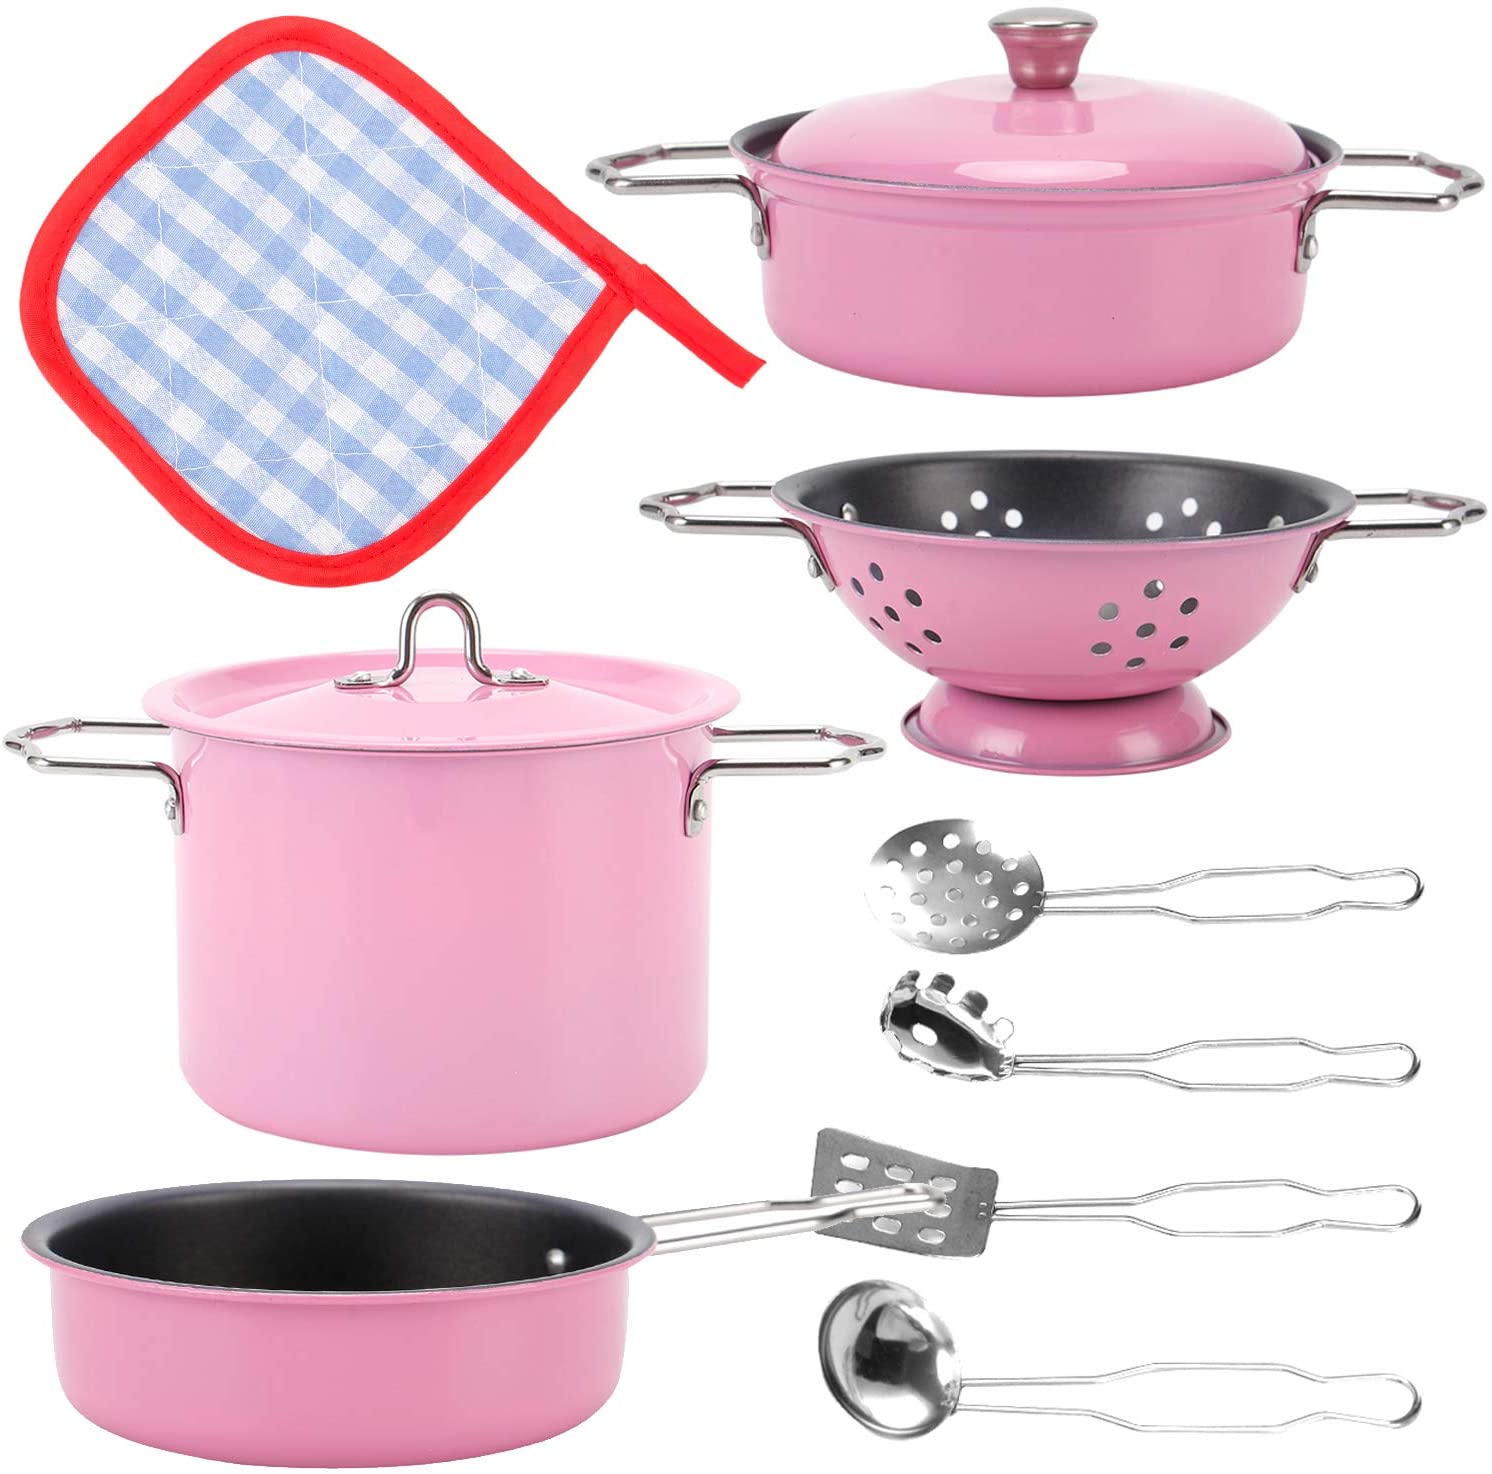 14 Pieces Liberty Imports Multicolored Stainless Steel Metal Pots and Pans Pretend Kitchen Cookware Playset for Kids with Play Utensils and Dish Rack 